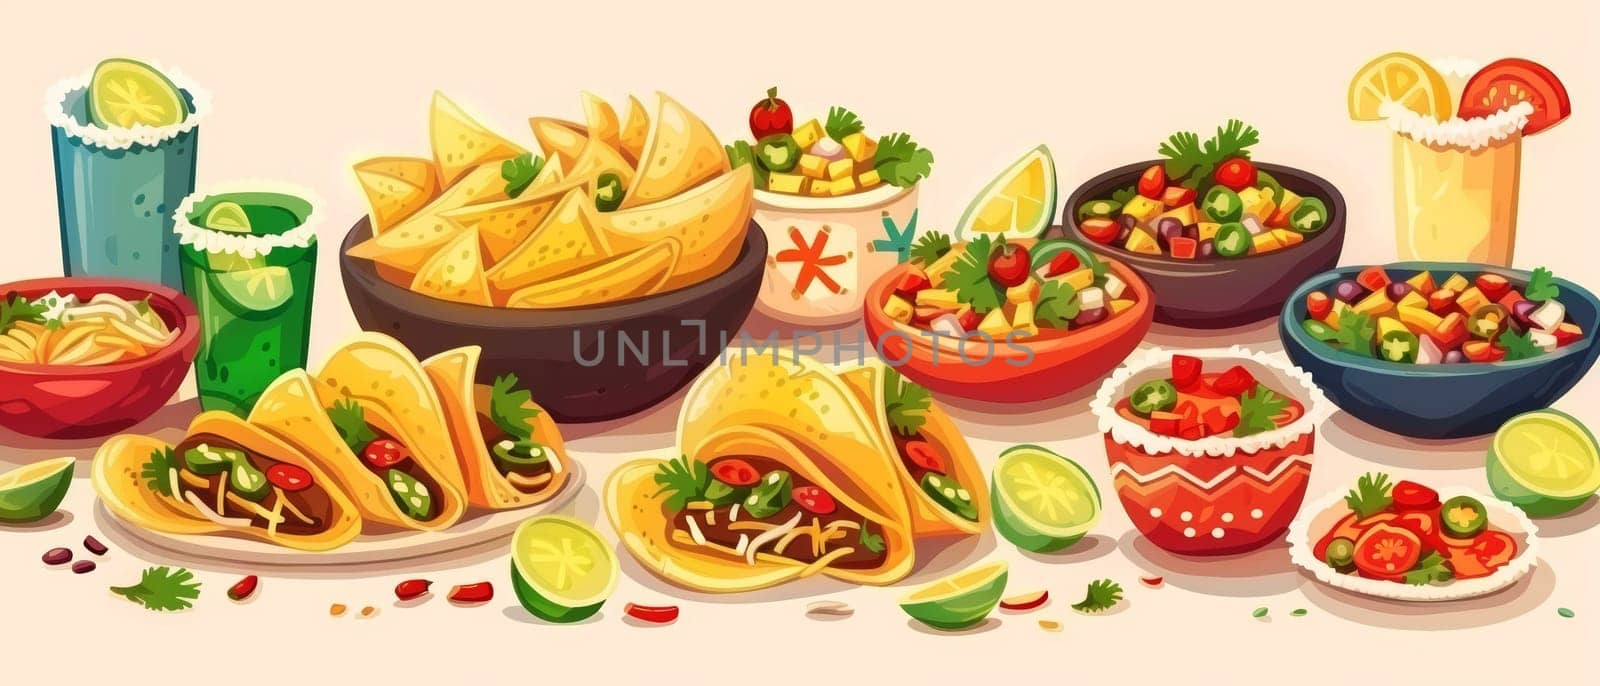 A vibrant and mouthwatering display of classic Mexican dishes, including tacos, salsas, guacamole, and more, creating a festive and flavorful scene. by sfinks